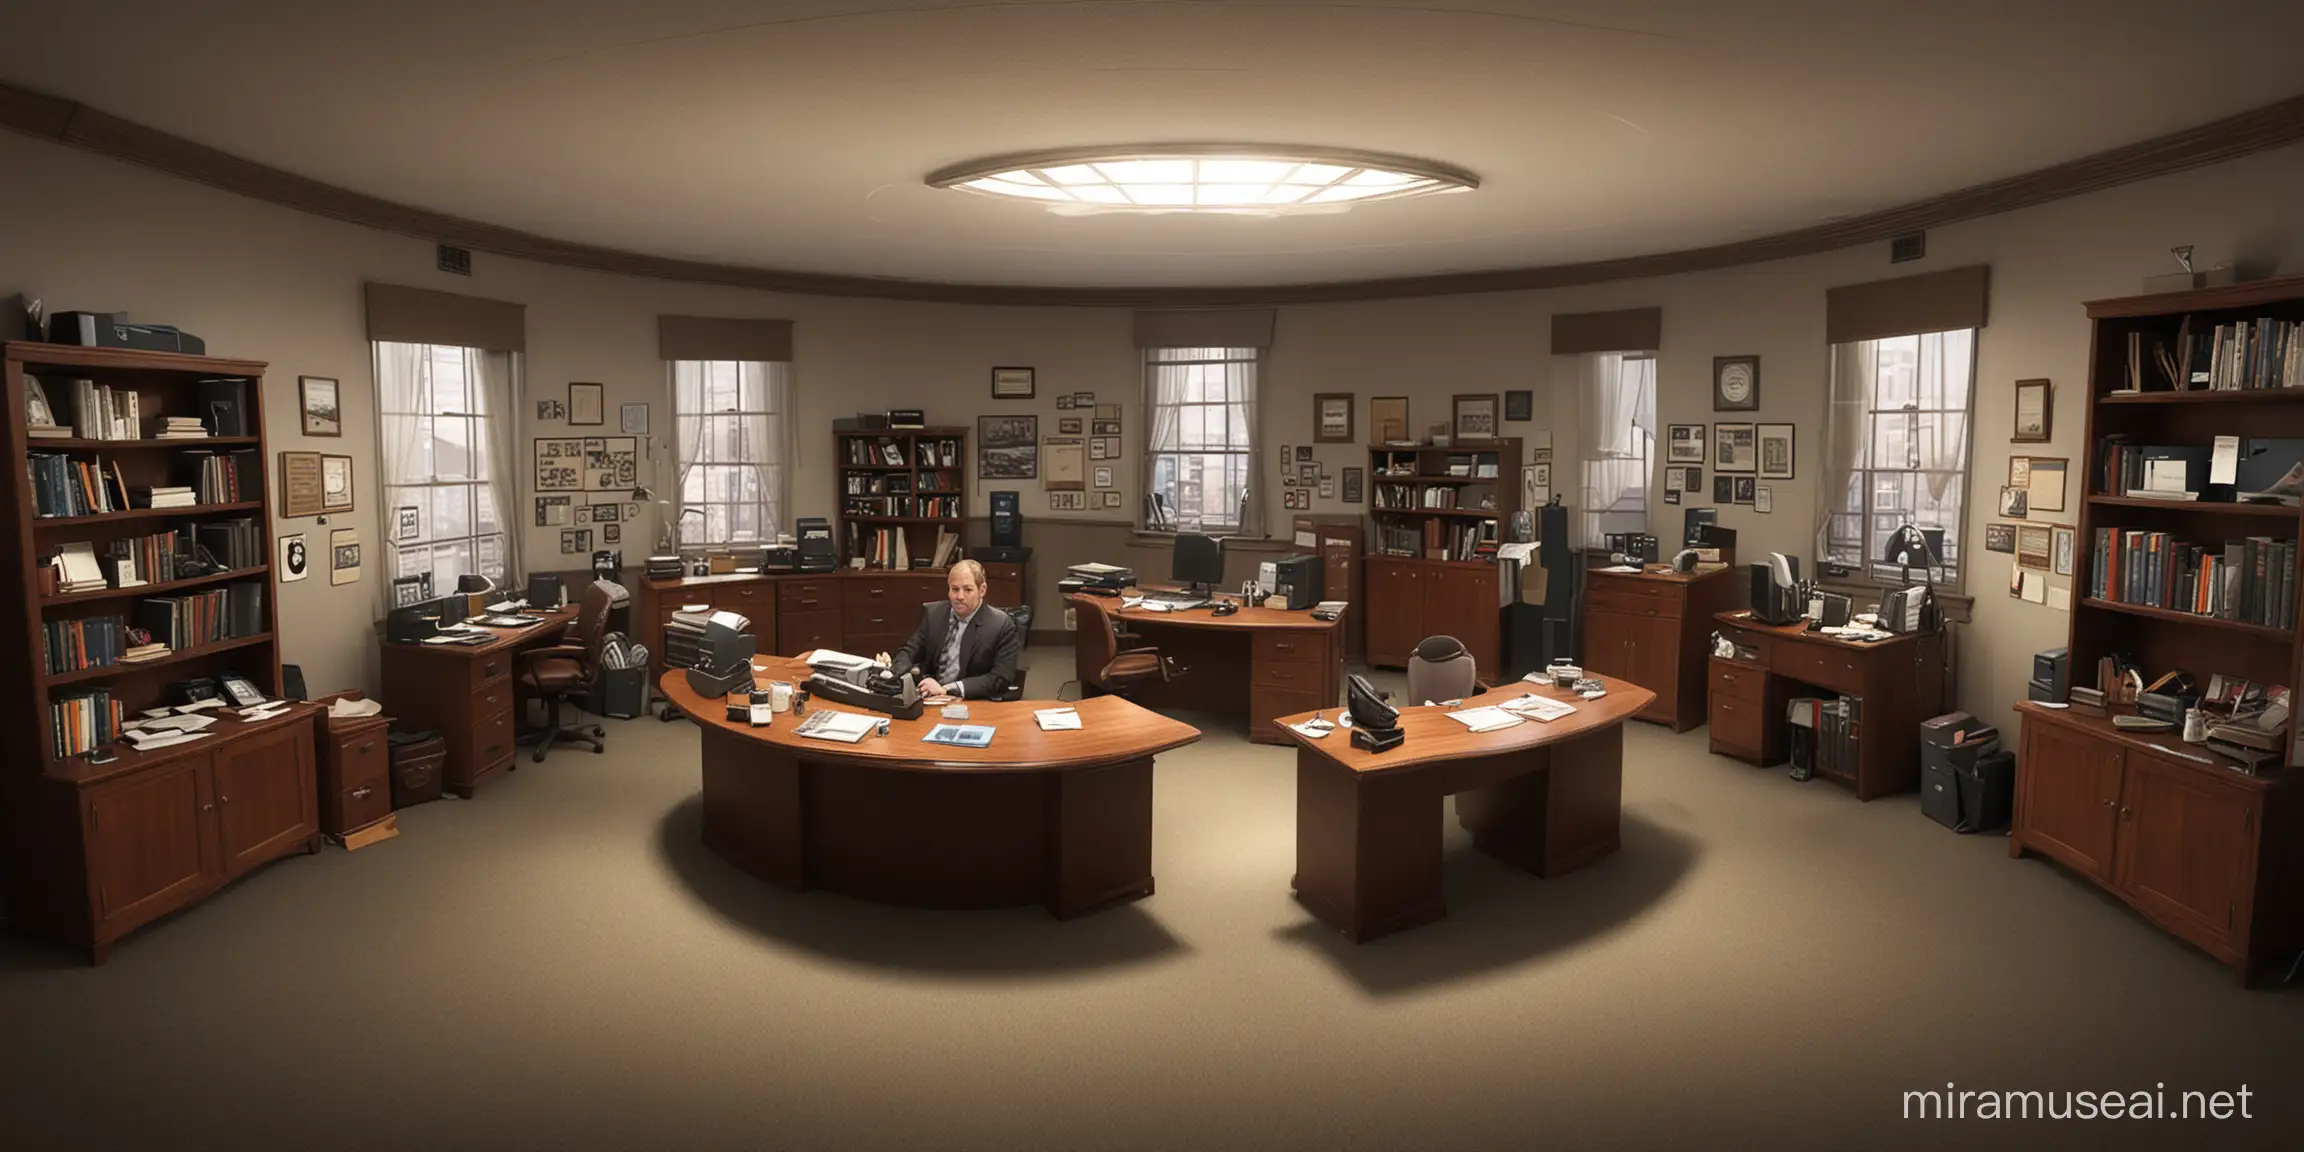 Create a 360-degree image of a detective's office with 3 detectives sitting on their seats and using desktops. make a real persons.